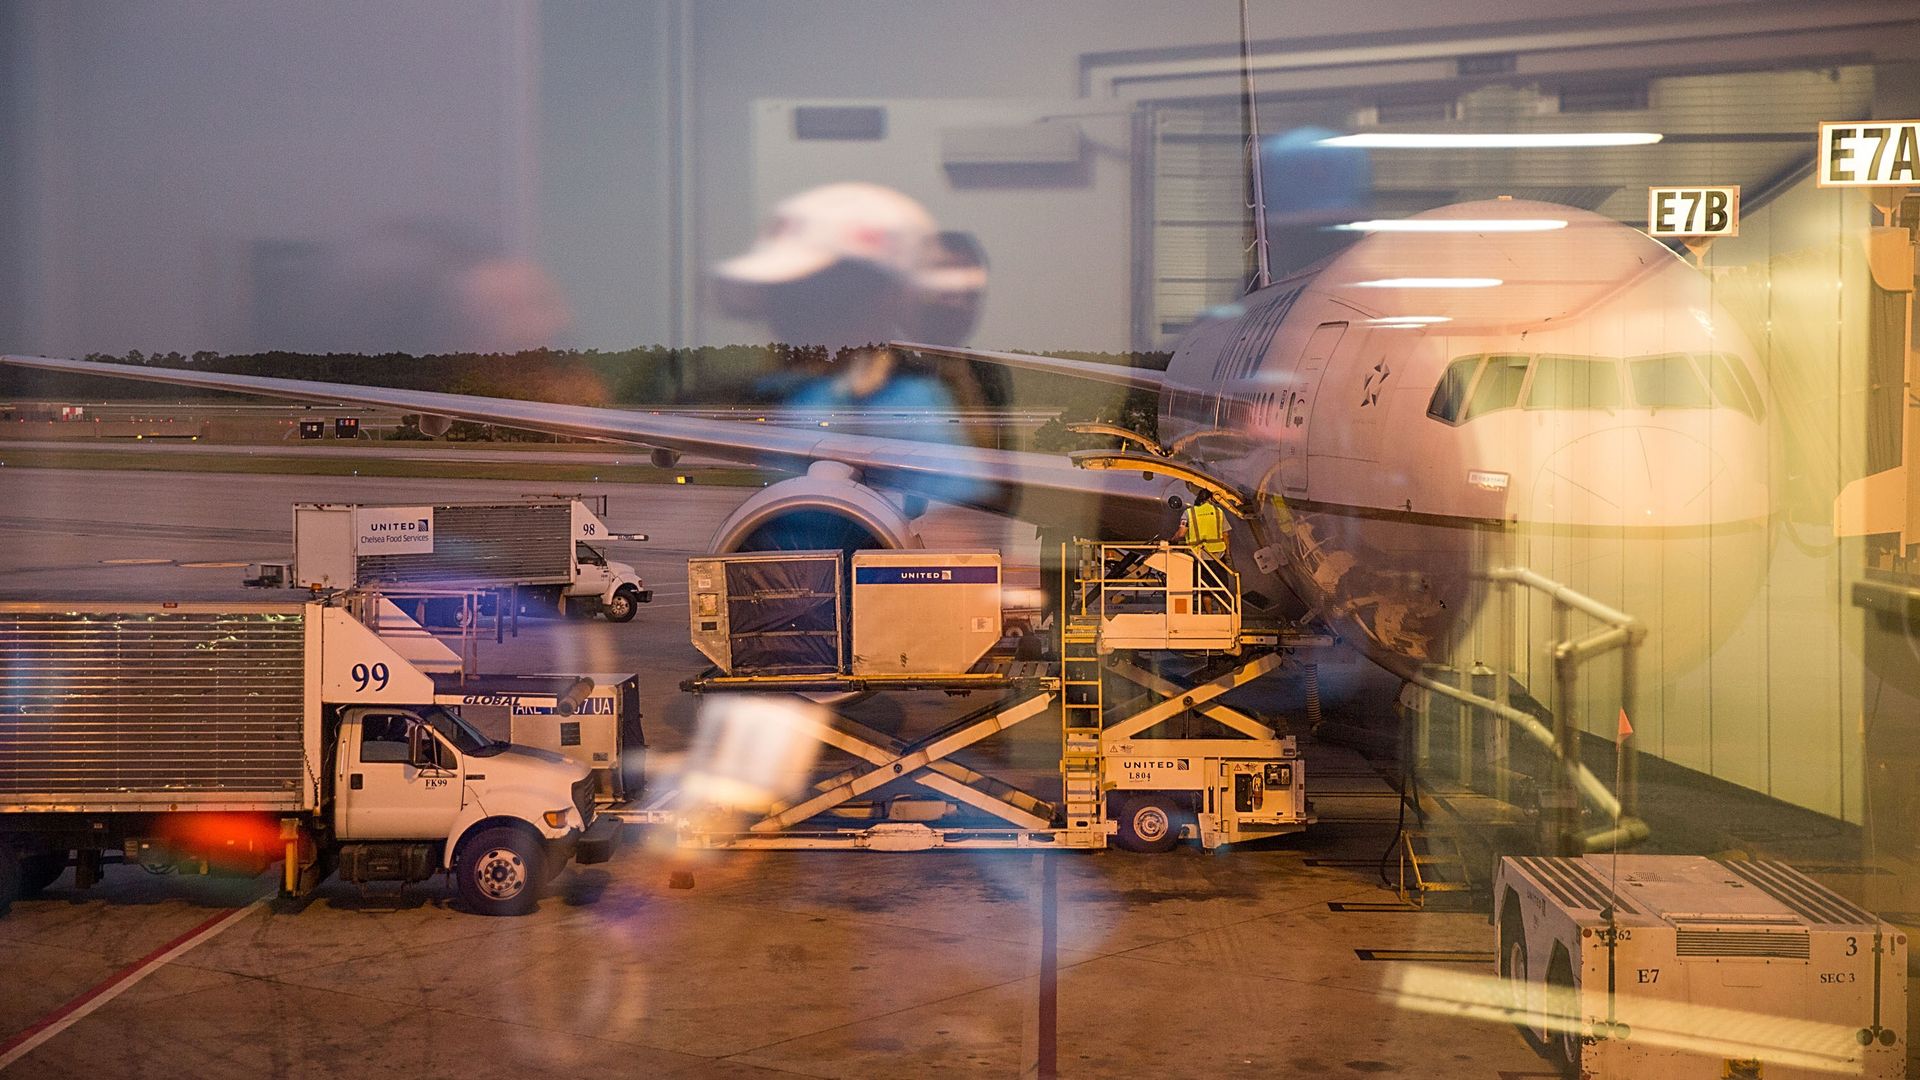 A photo of an airplane parked at a gate taken through a window, with passengers' reflections in the glass